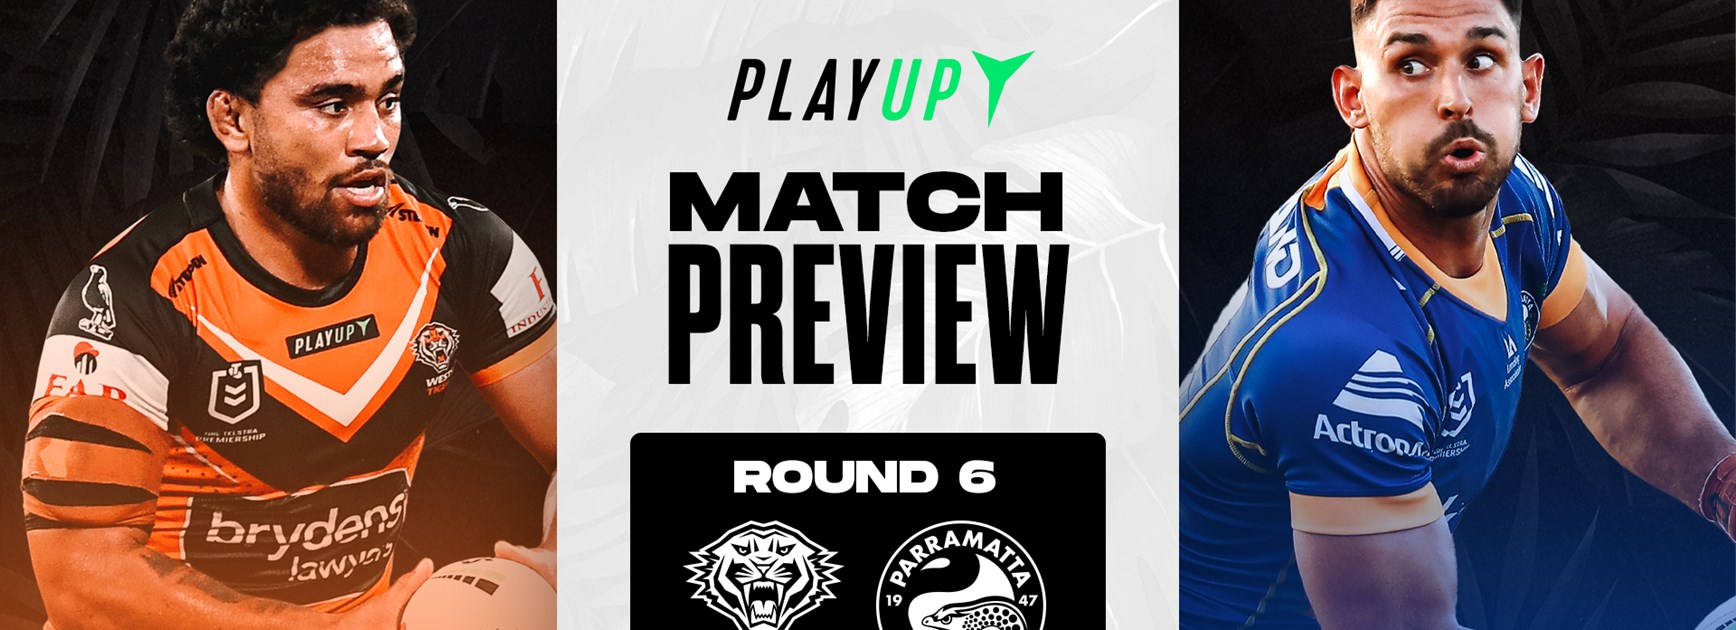 Match Preview: Round 6 vs Eels